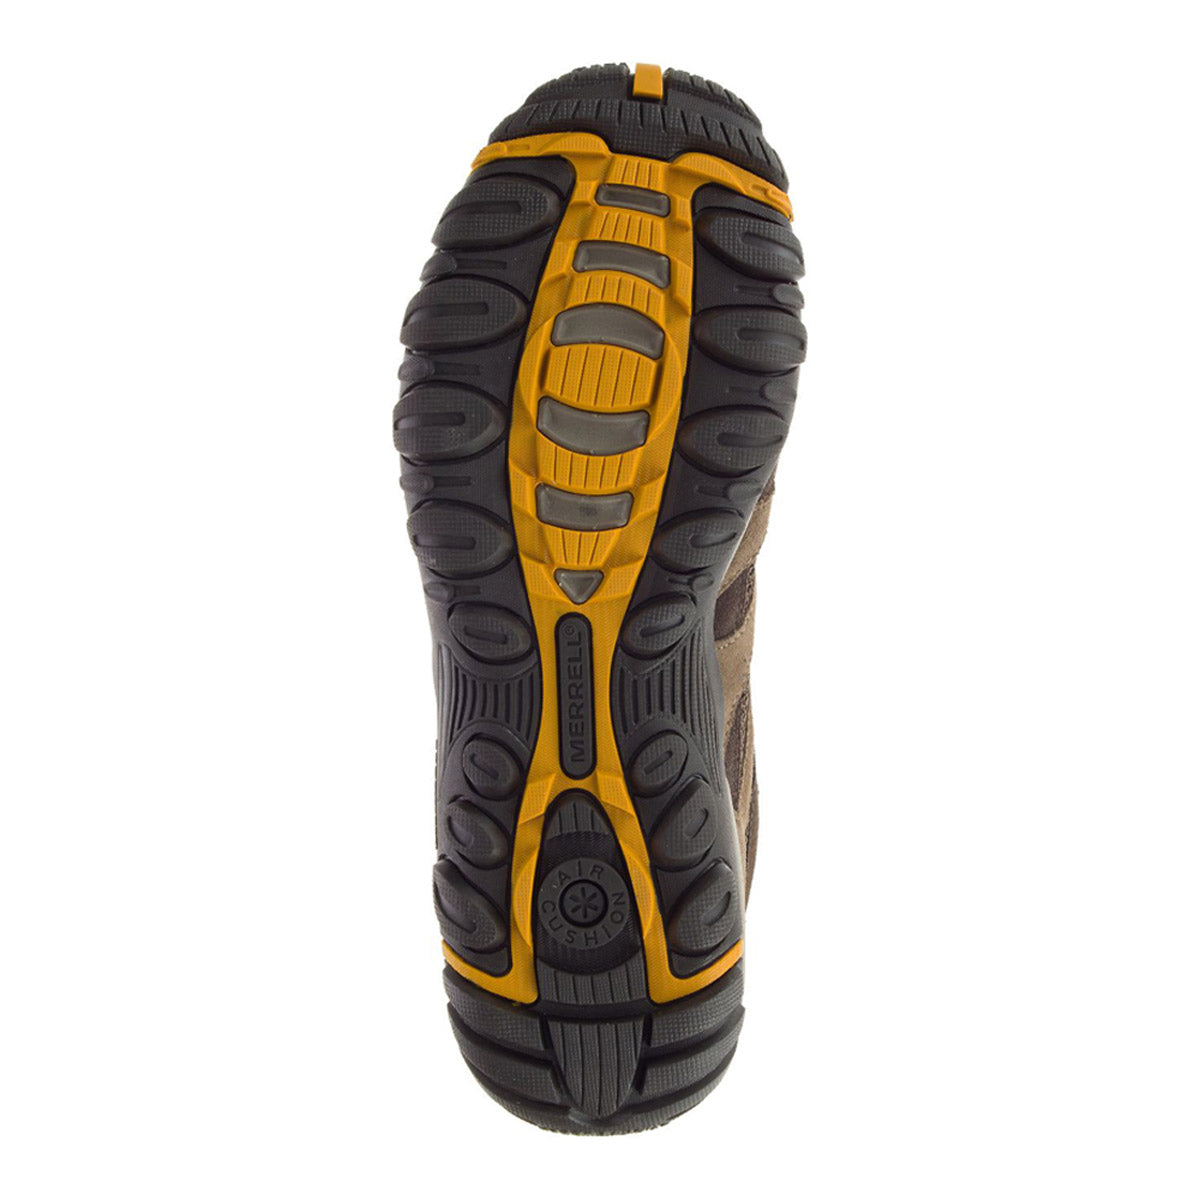 Tread pattern of a Merrell Alverstone Mid WP hiking boot sole with black and yellow accents.